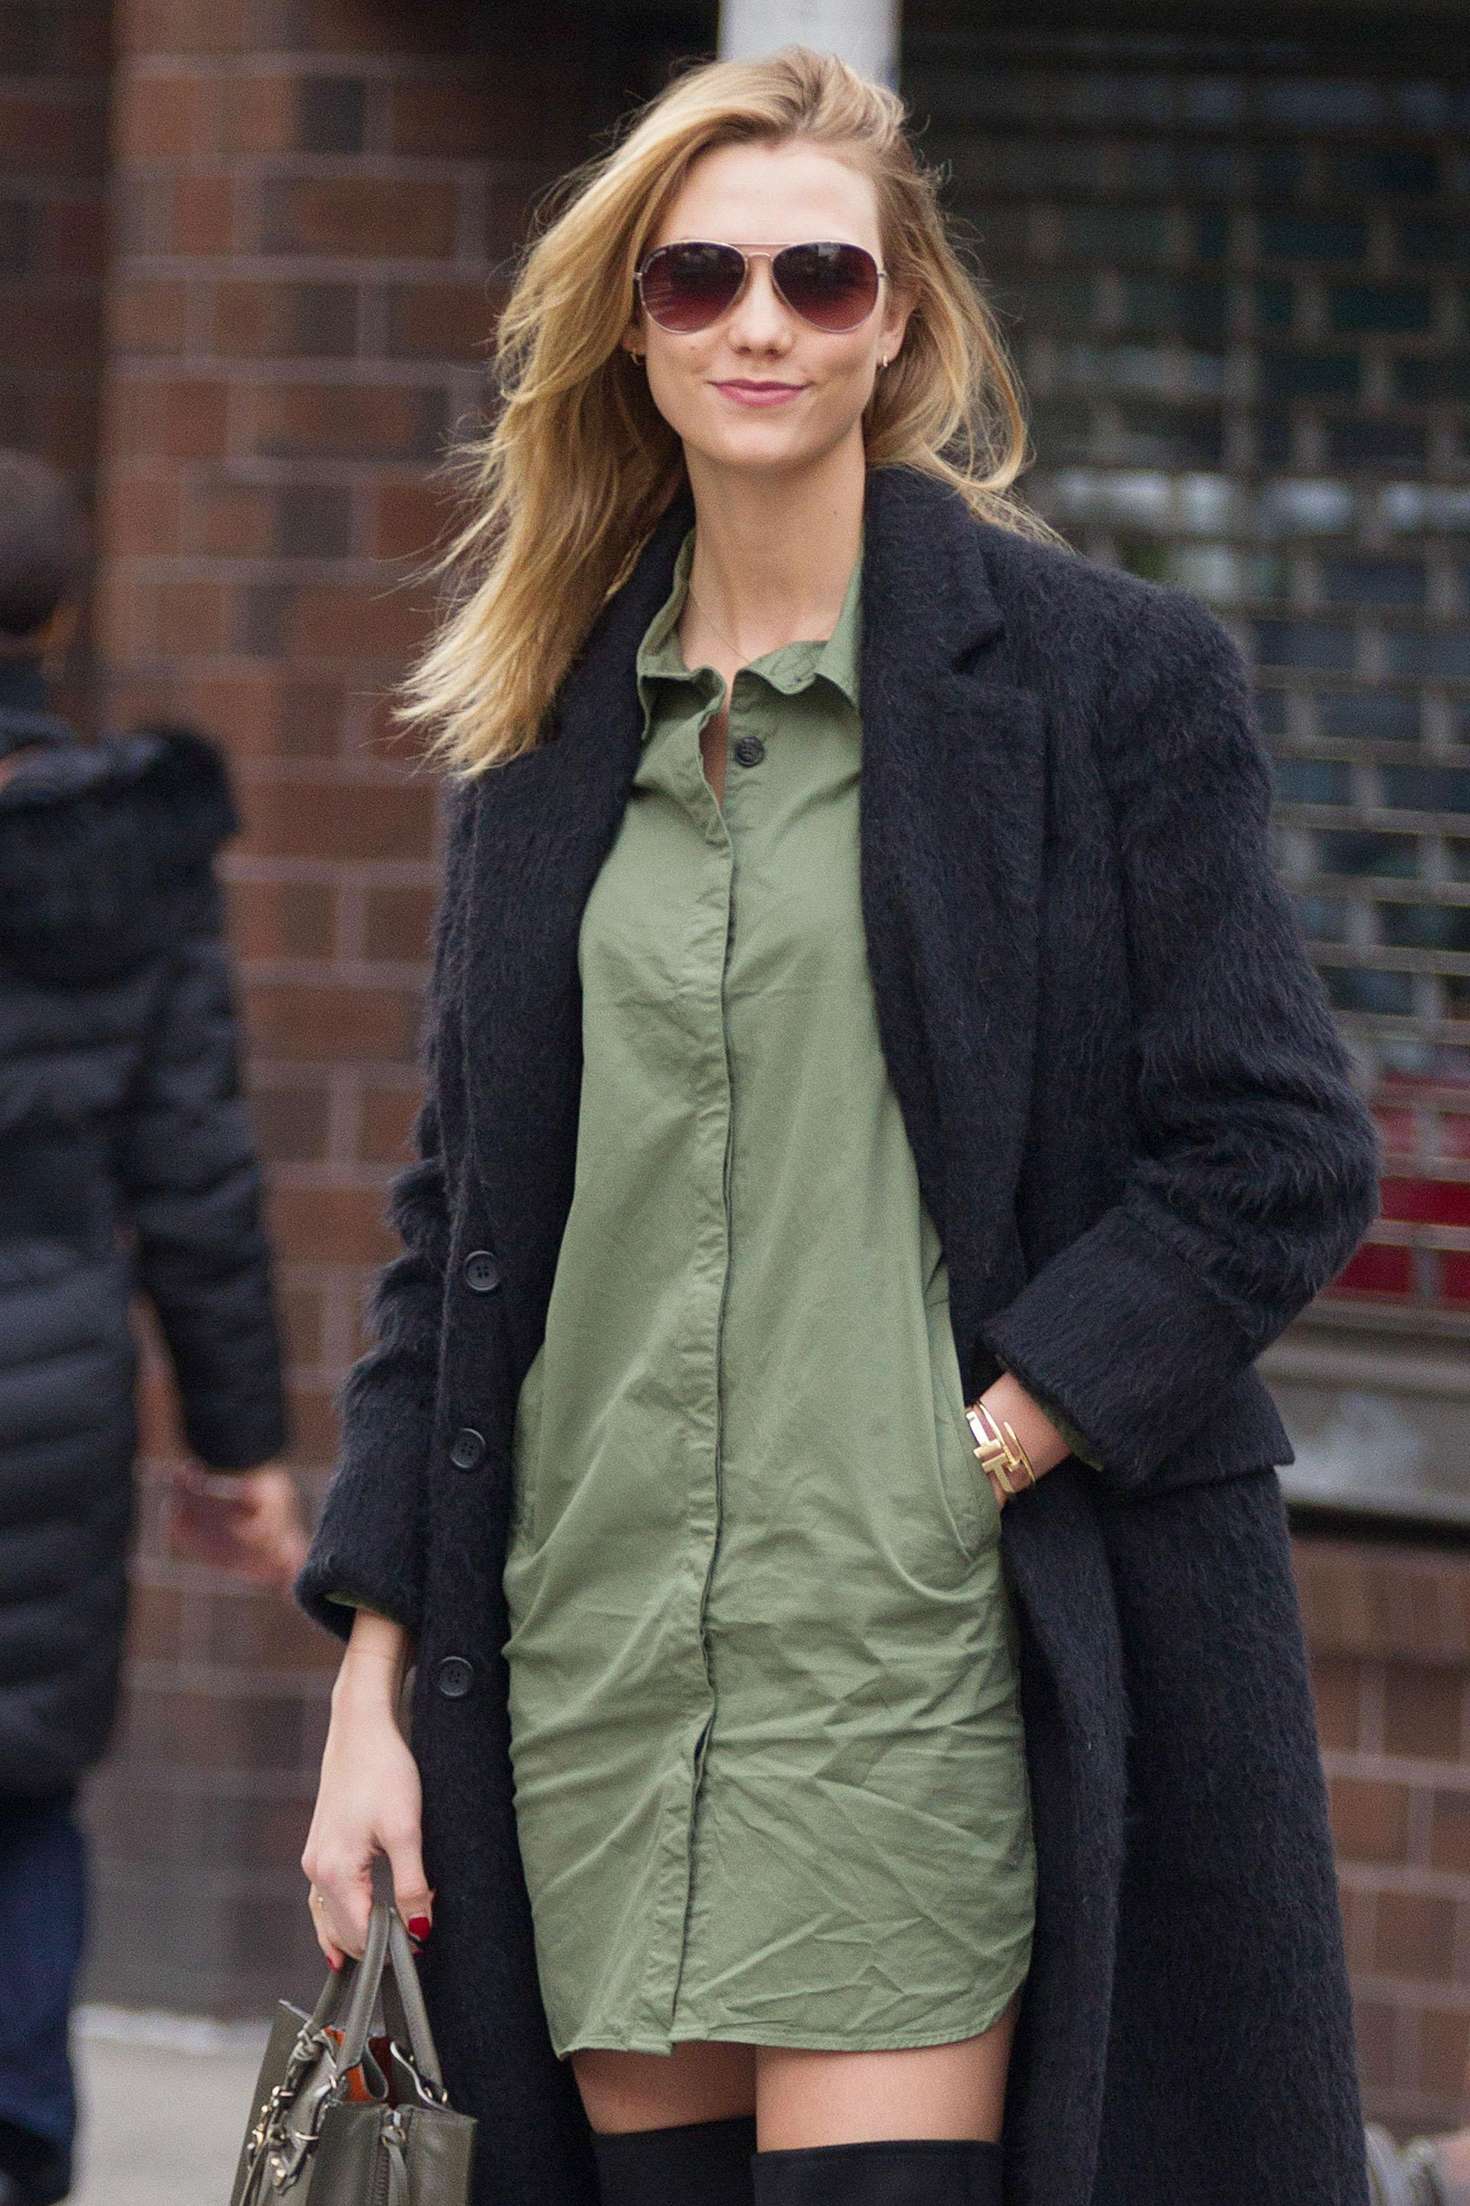 Karlie Kloss in Green Dress out in NYC | GotCeleb